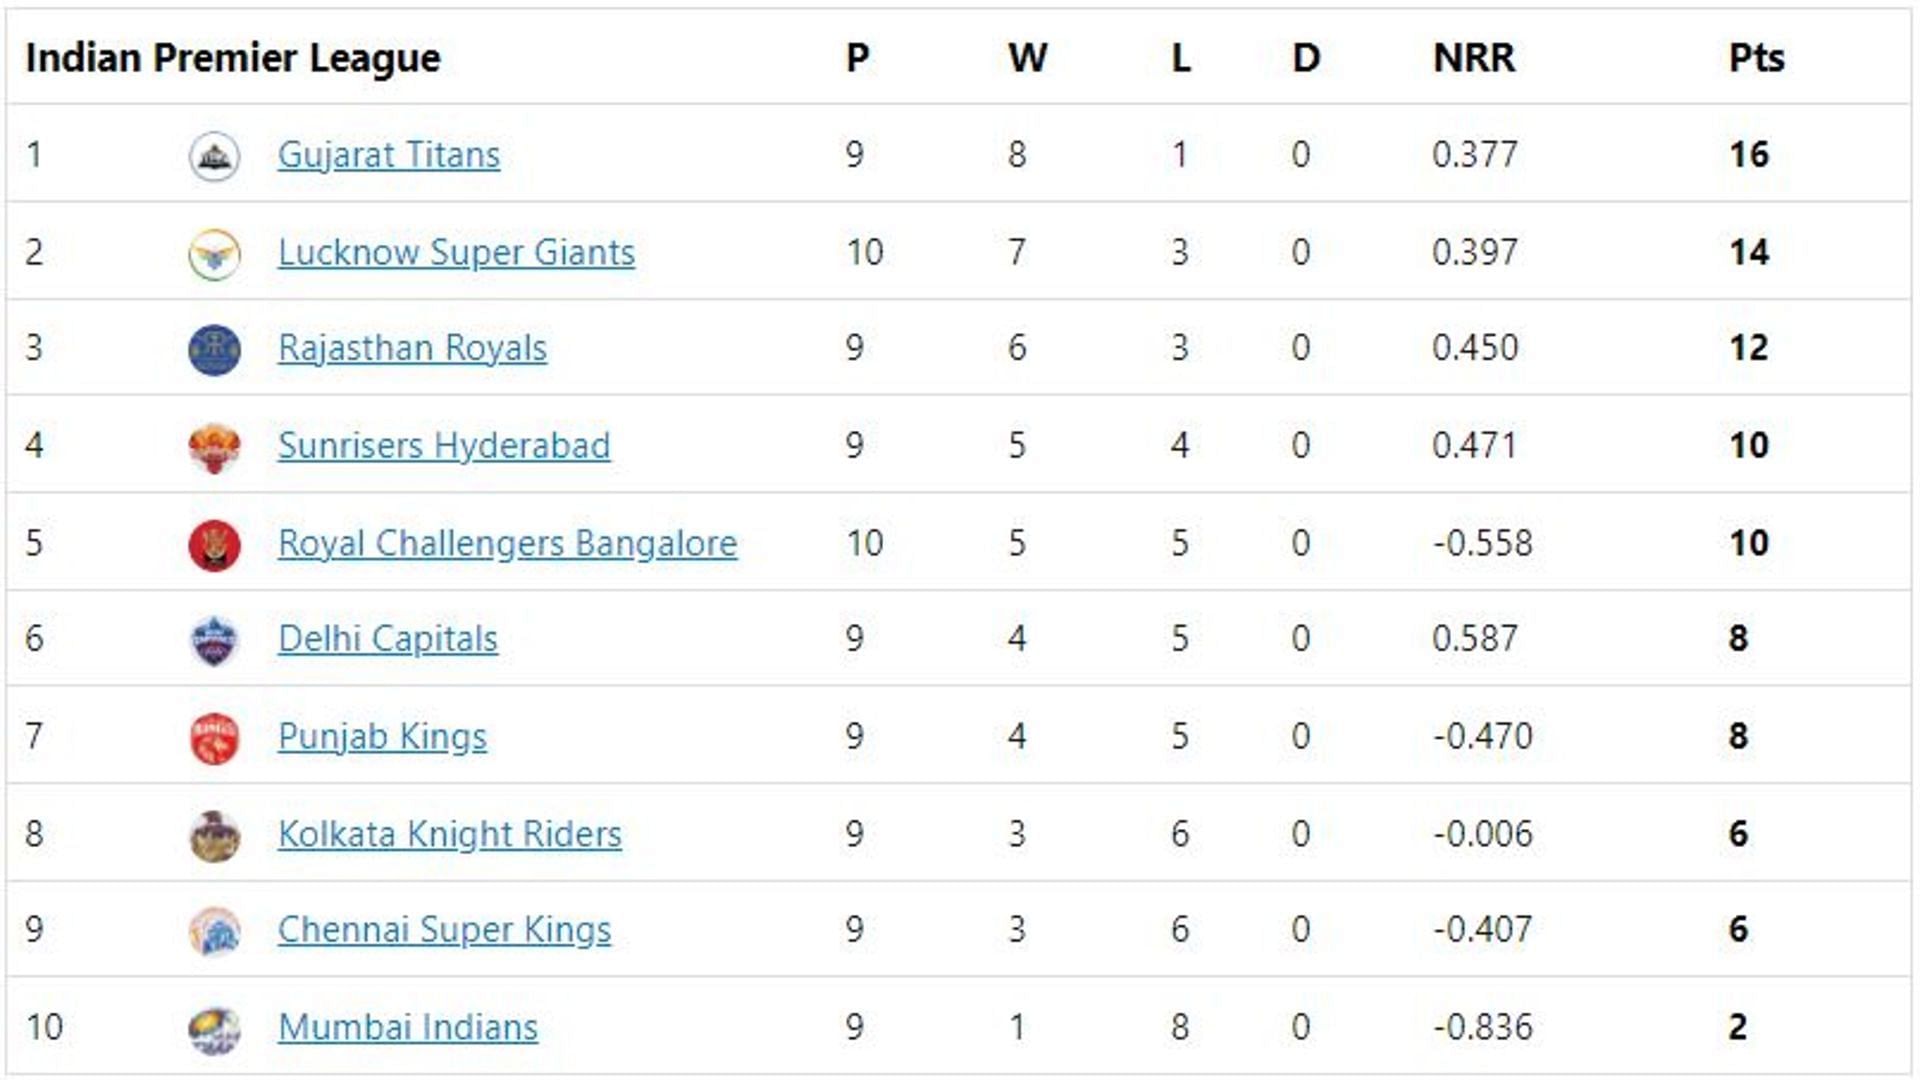 CSK are now level with KKR after their third win